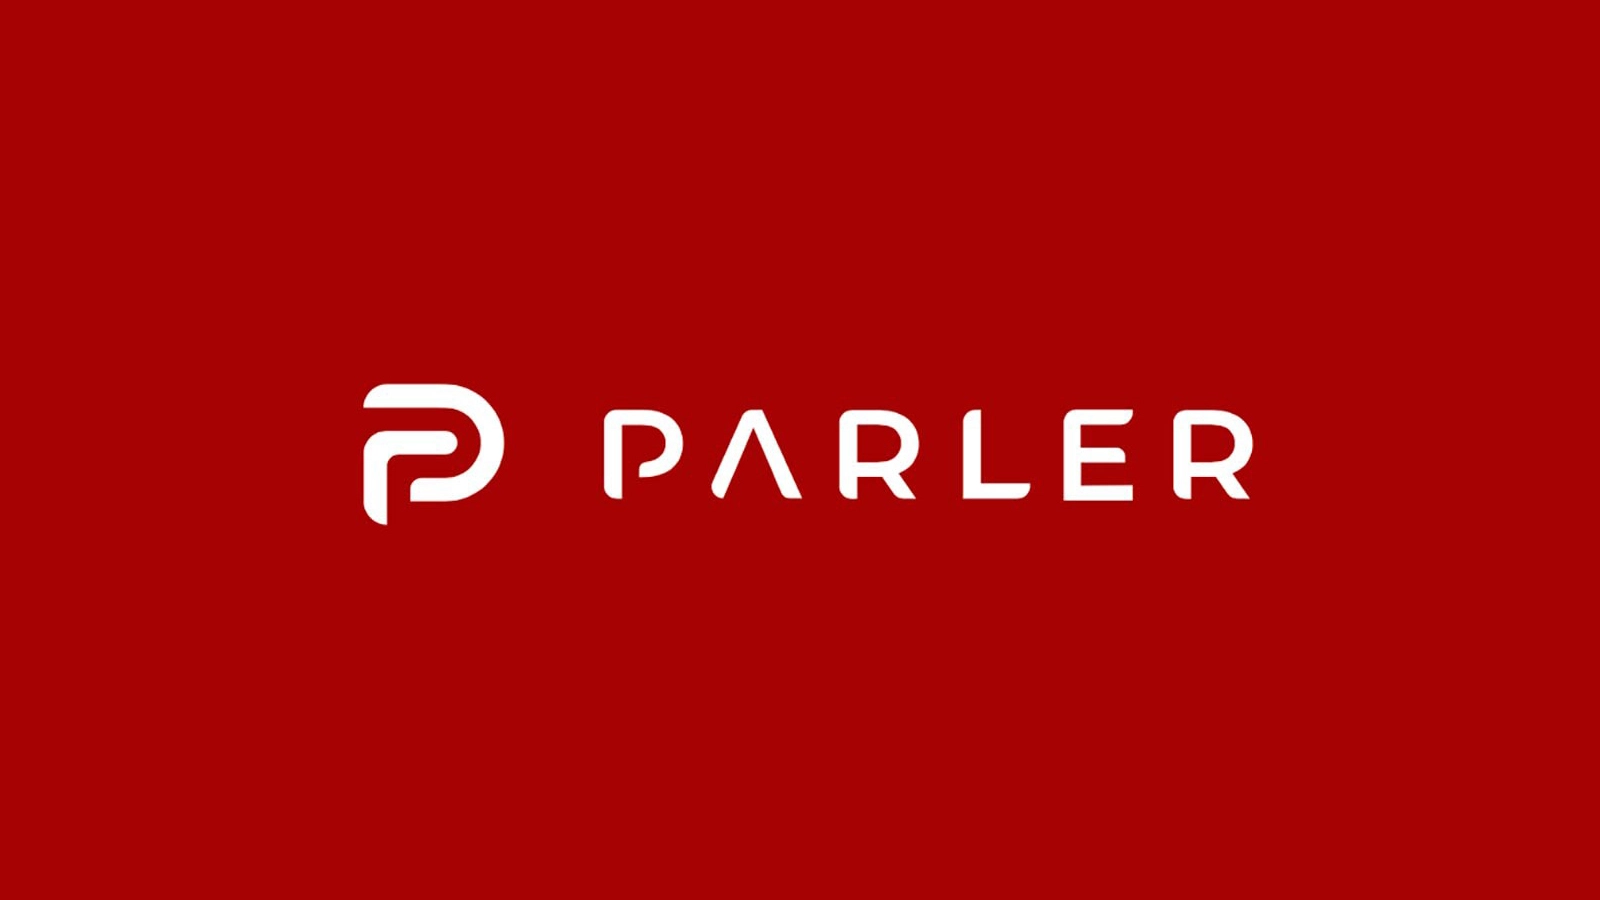 Which are the best applications like parler?